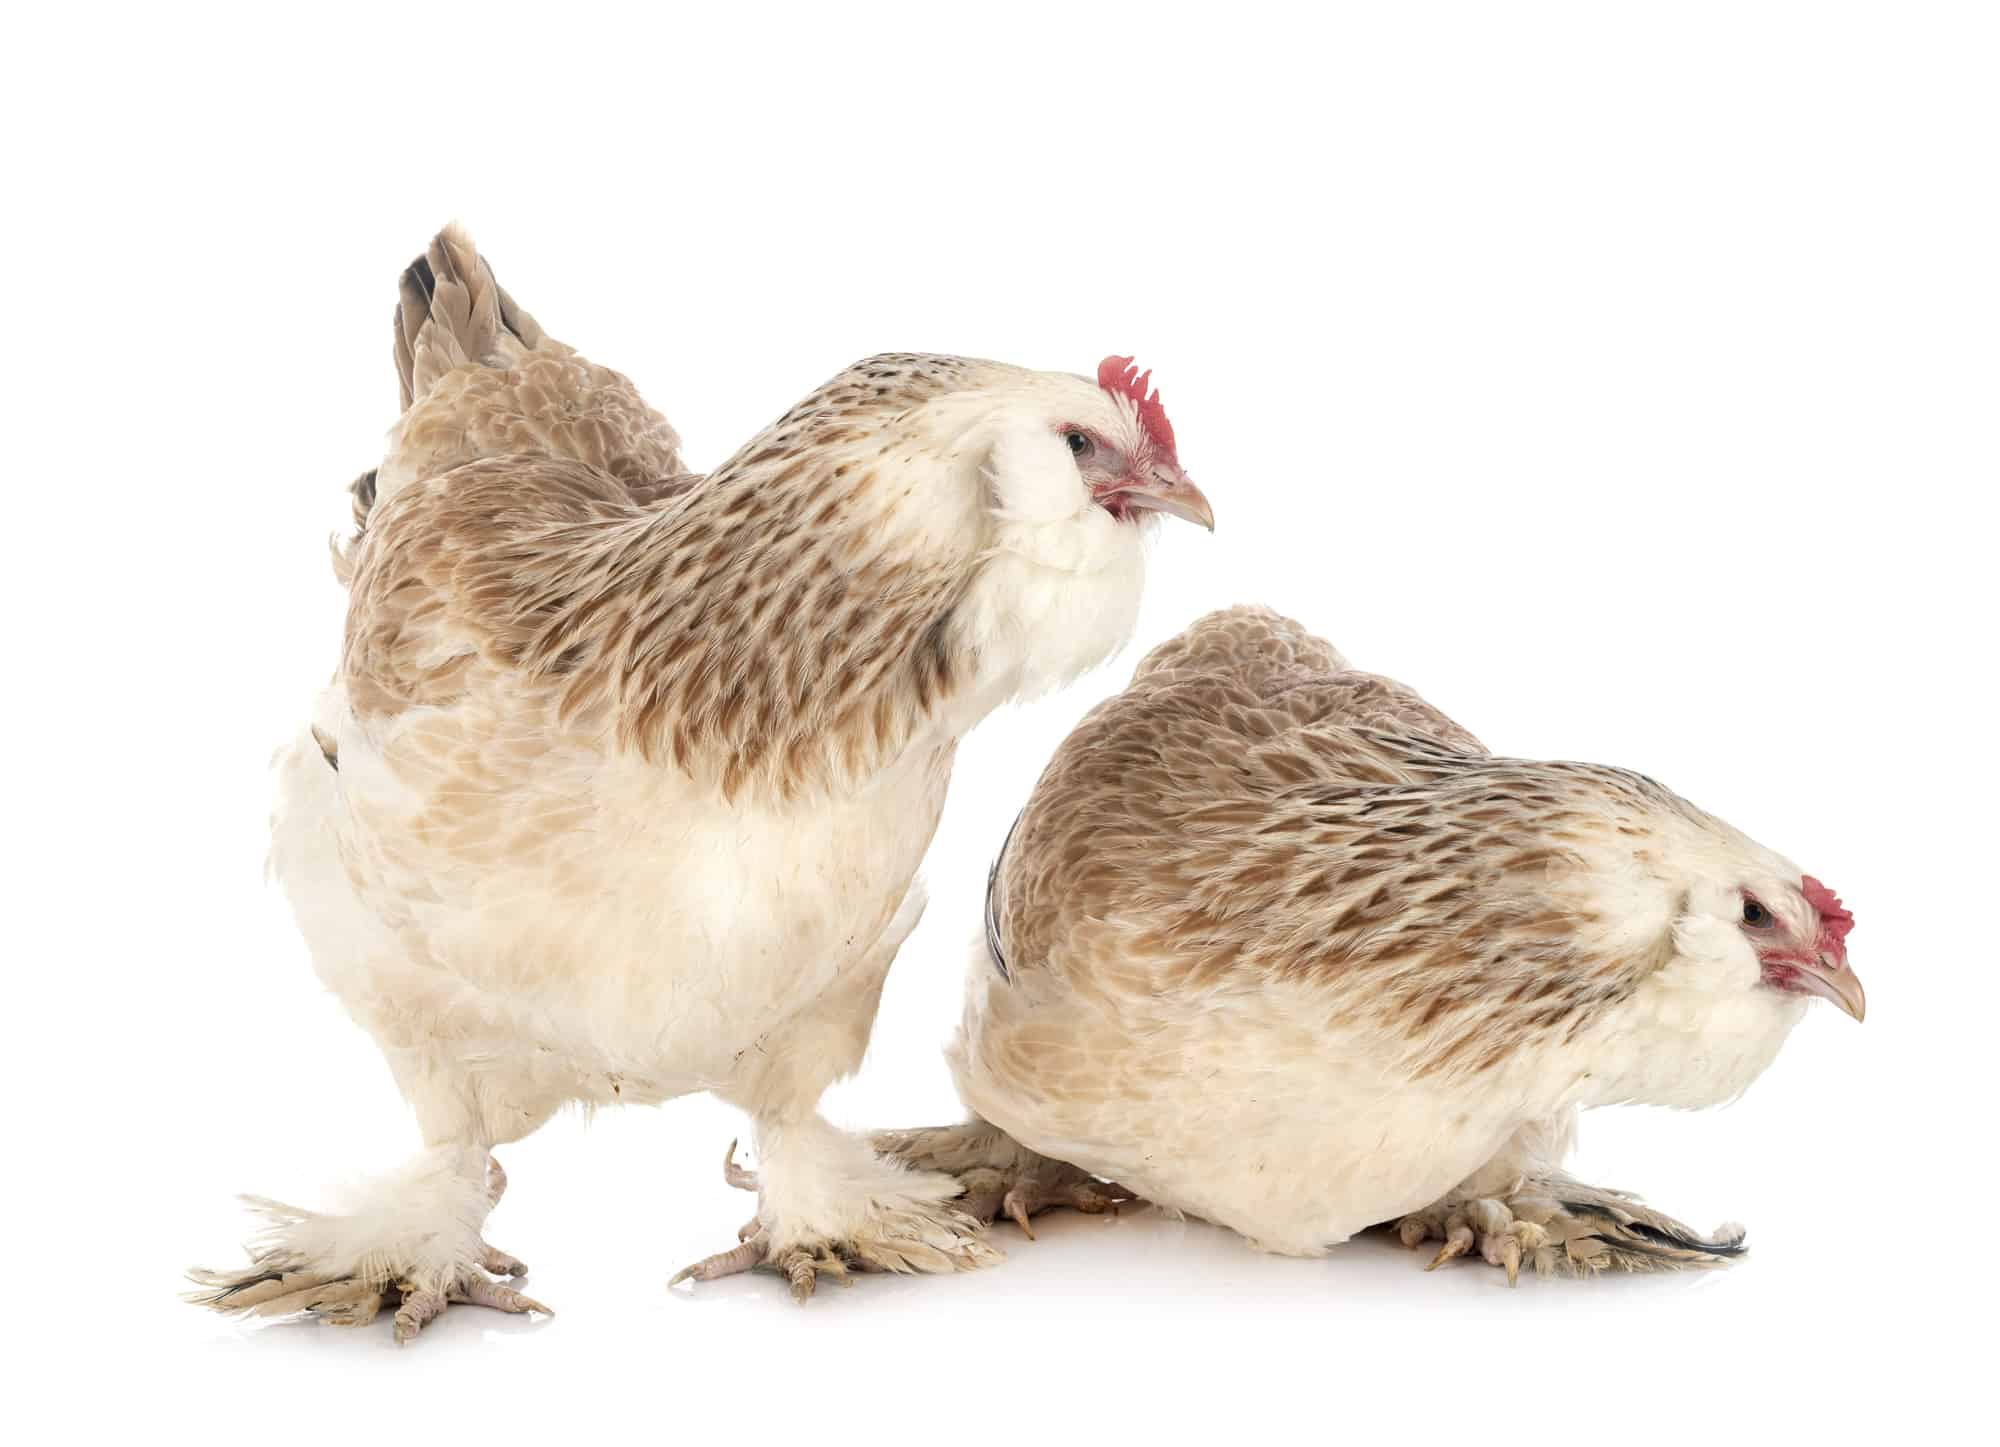 Two Salmon Faverolles hens in front of white background